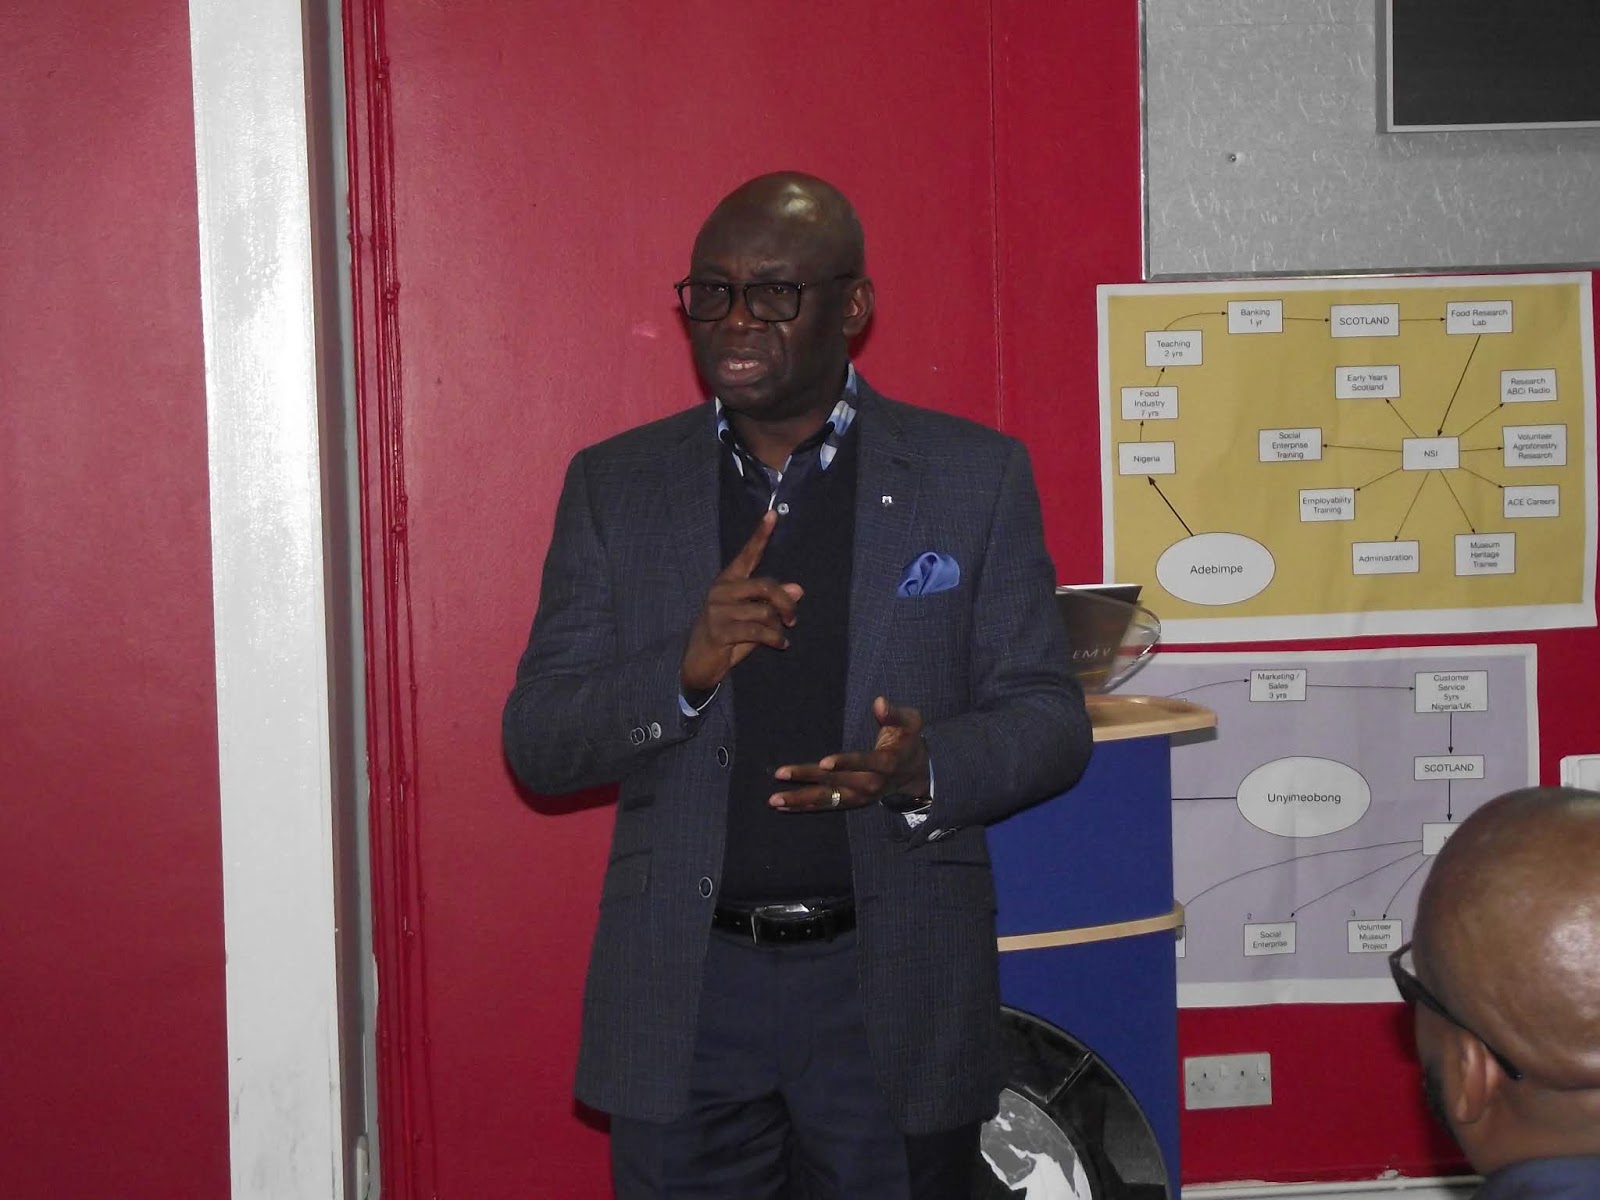 AN EVENING WITH PASTOR TUNDE BAKARE IN GLASGOW